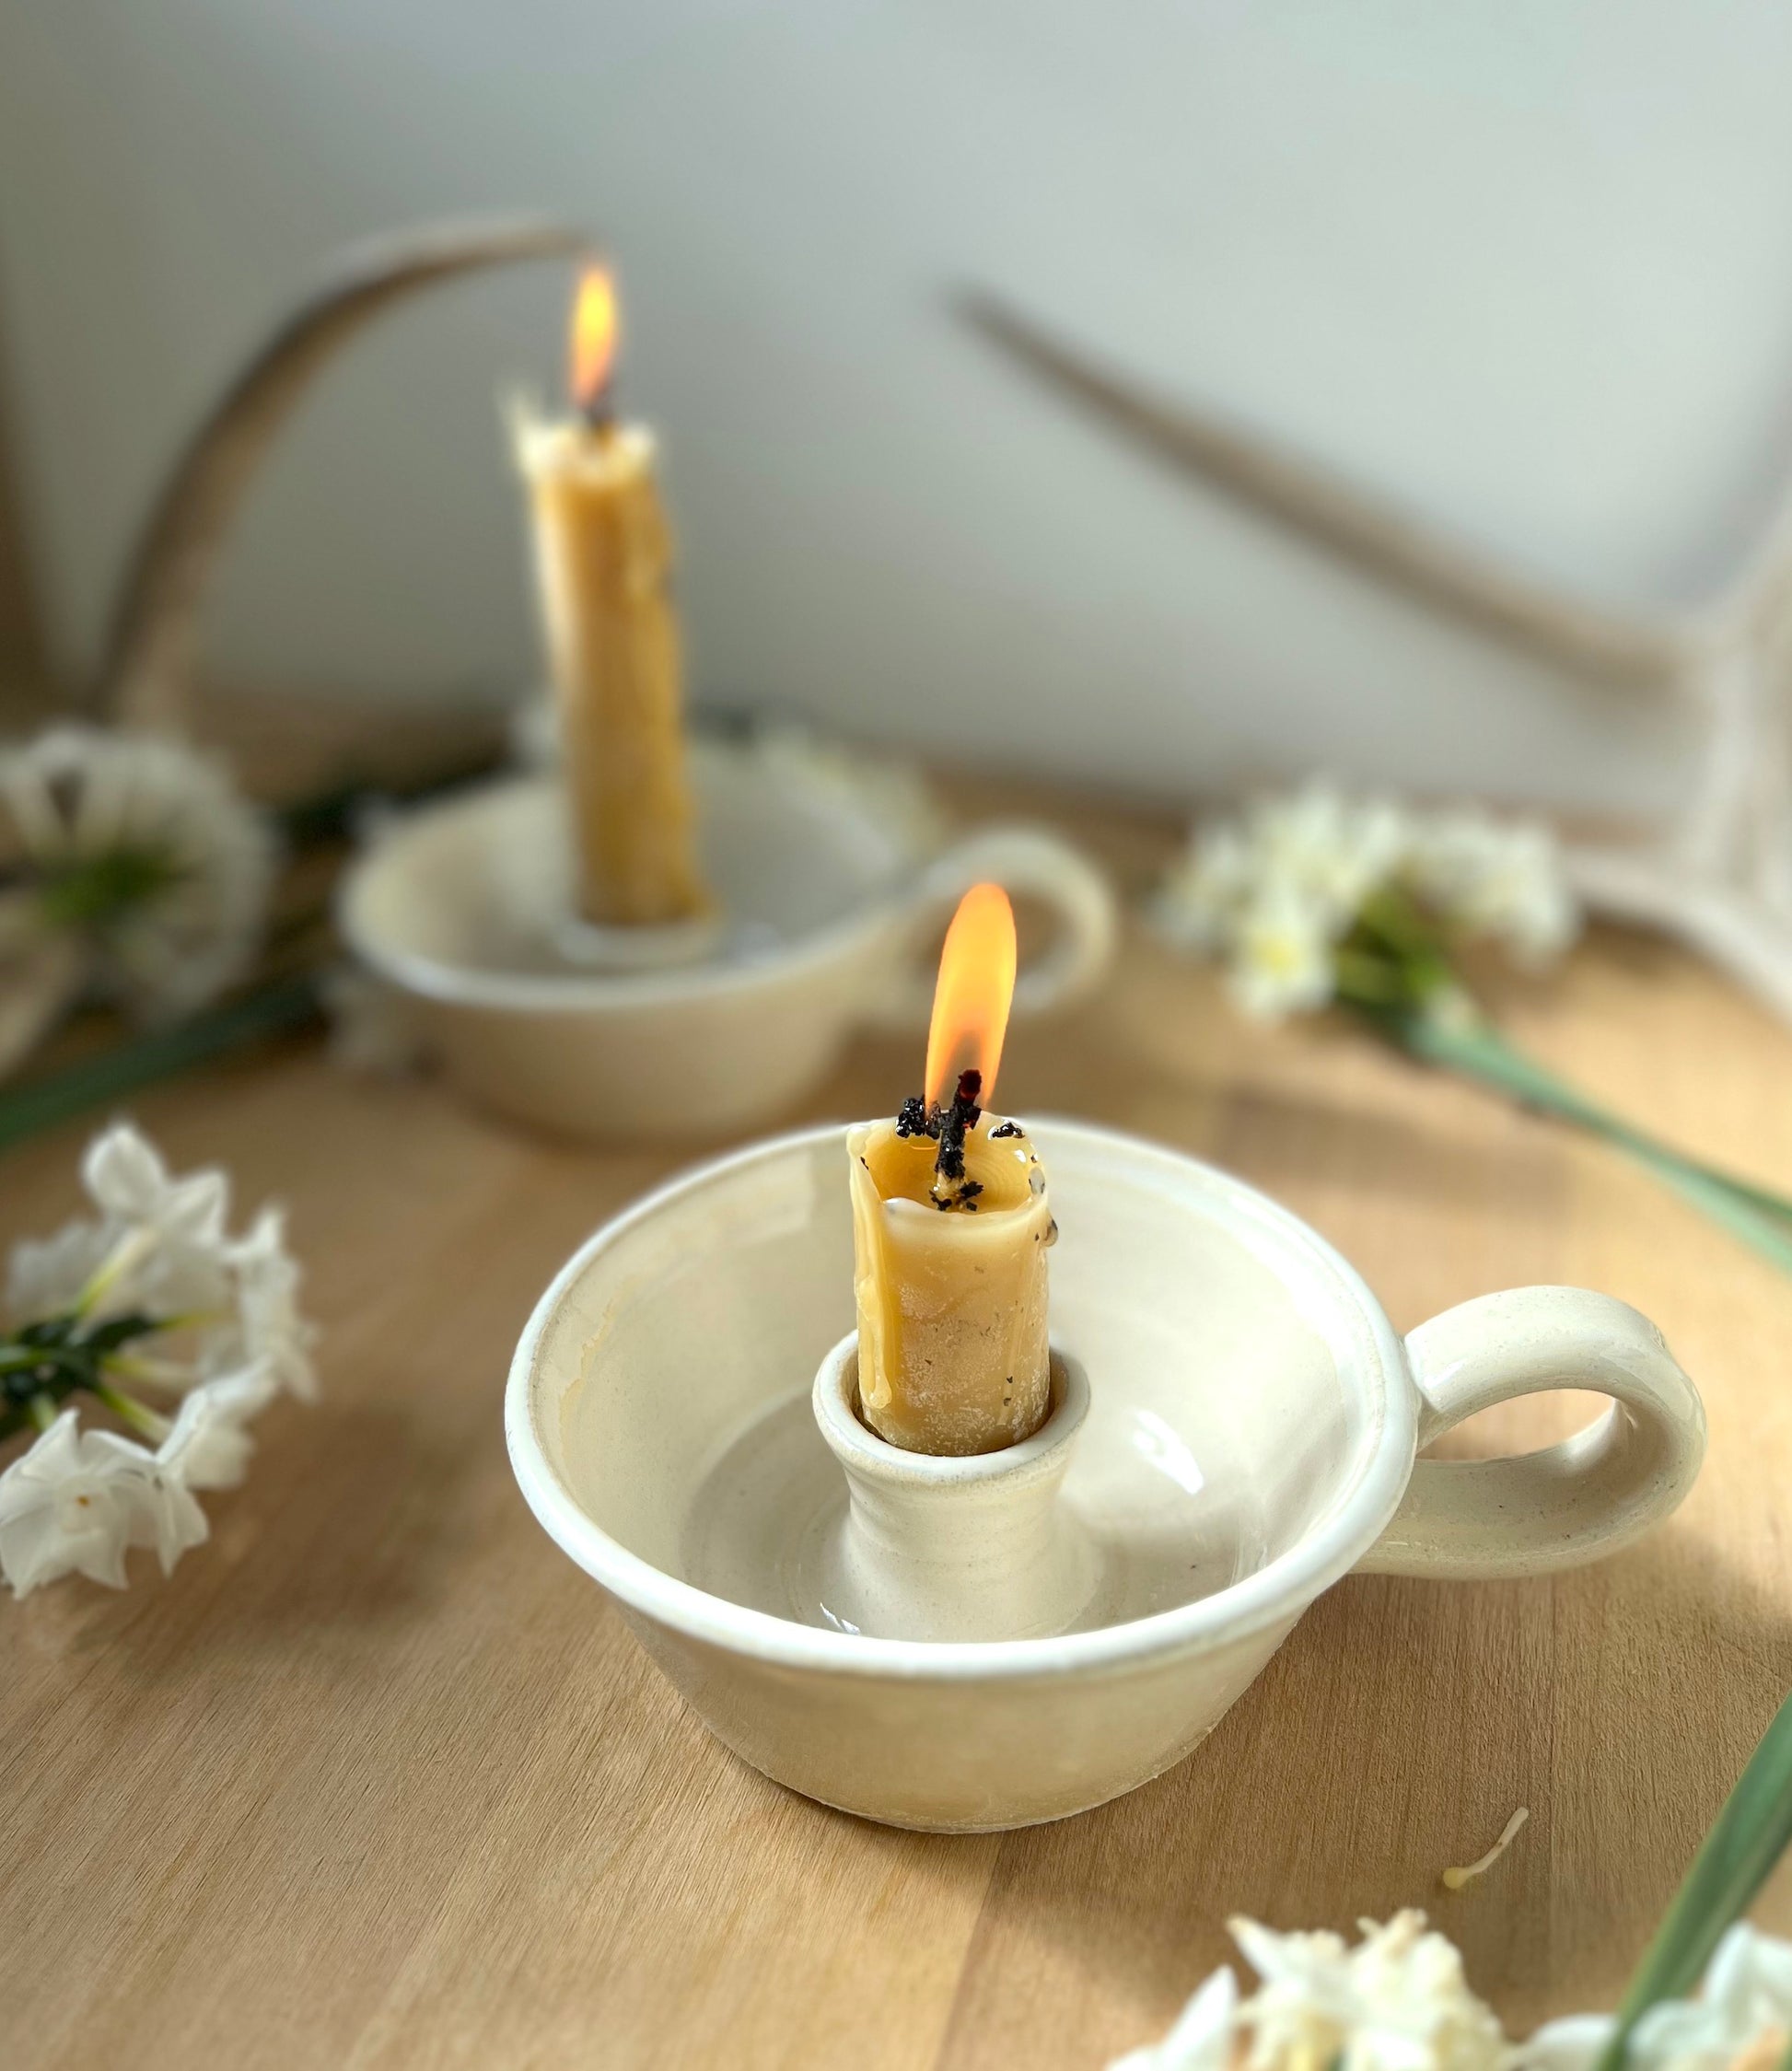 White Taper Candle Holder With Handle Ceramic Candlestick Holder